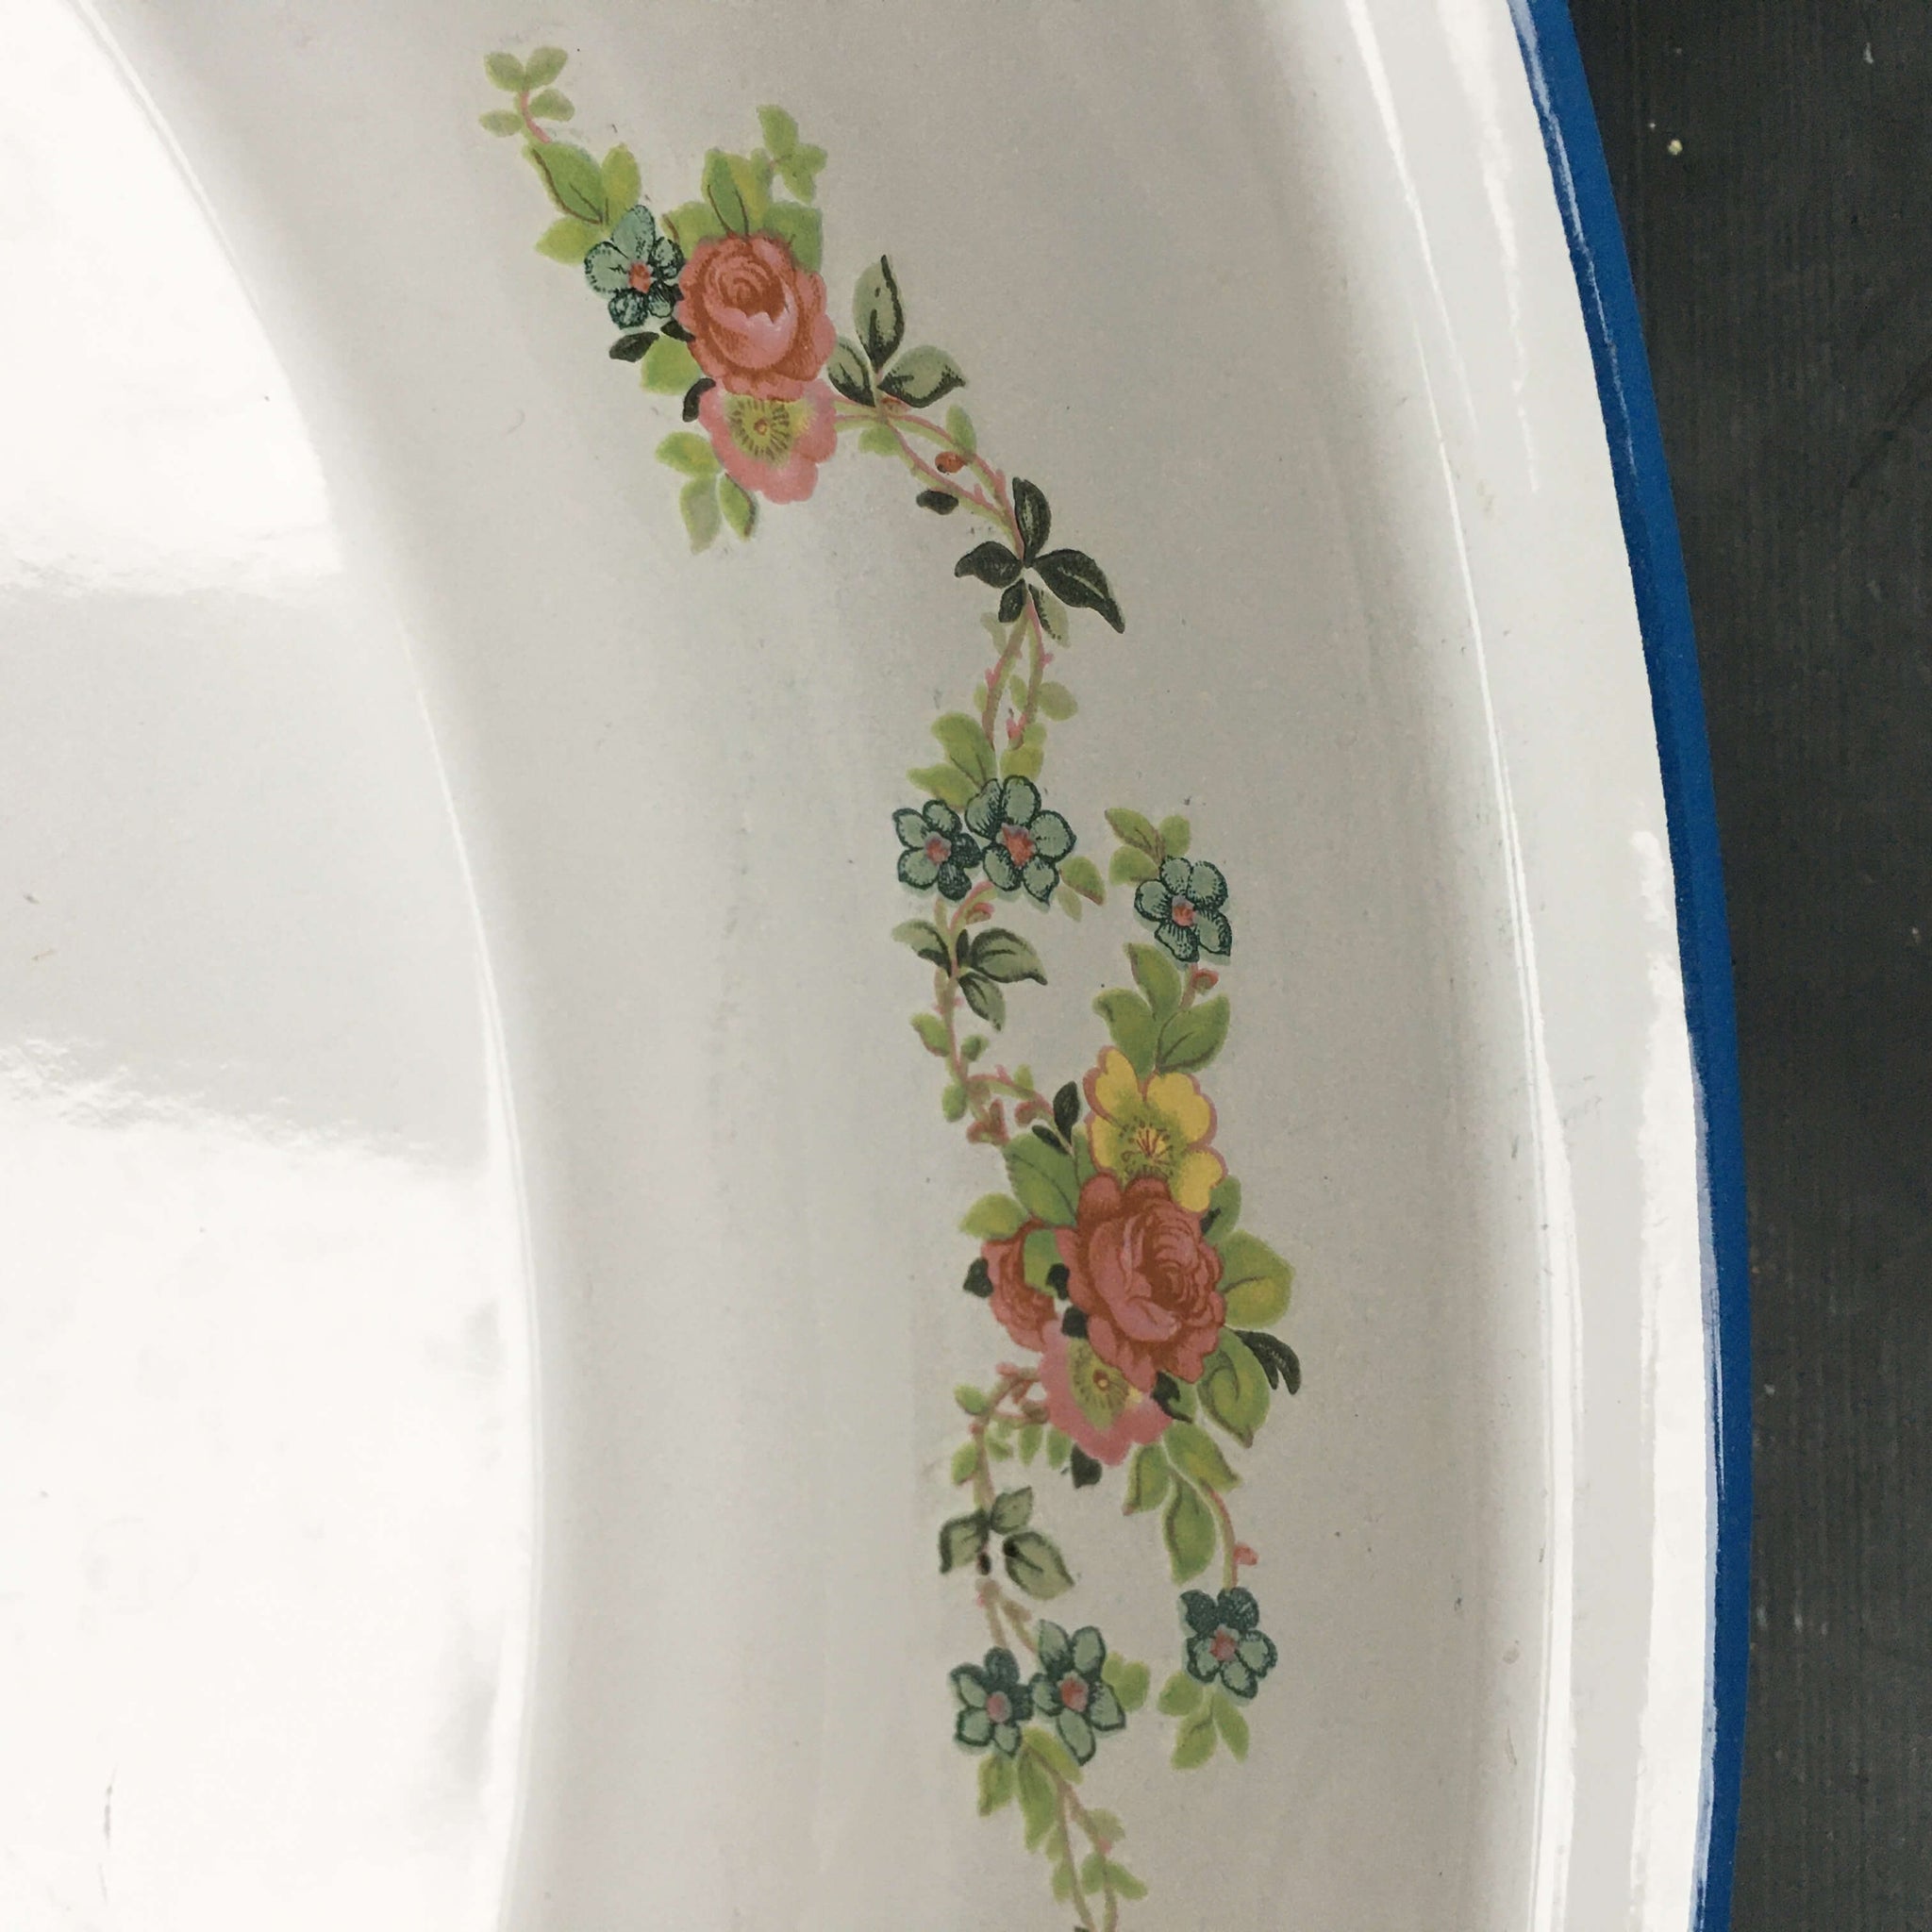 Vintage Cinsa Enamelware Oval Serving Bowl - Floral Pattern - Made in Mexico  circa 1970s